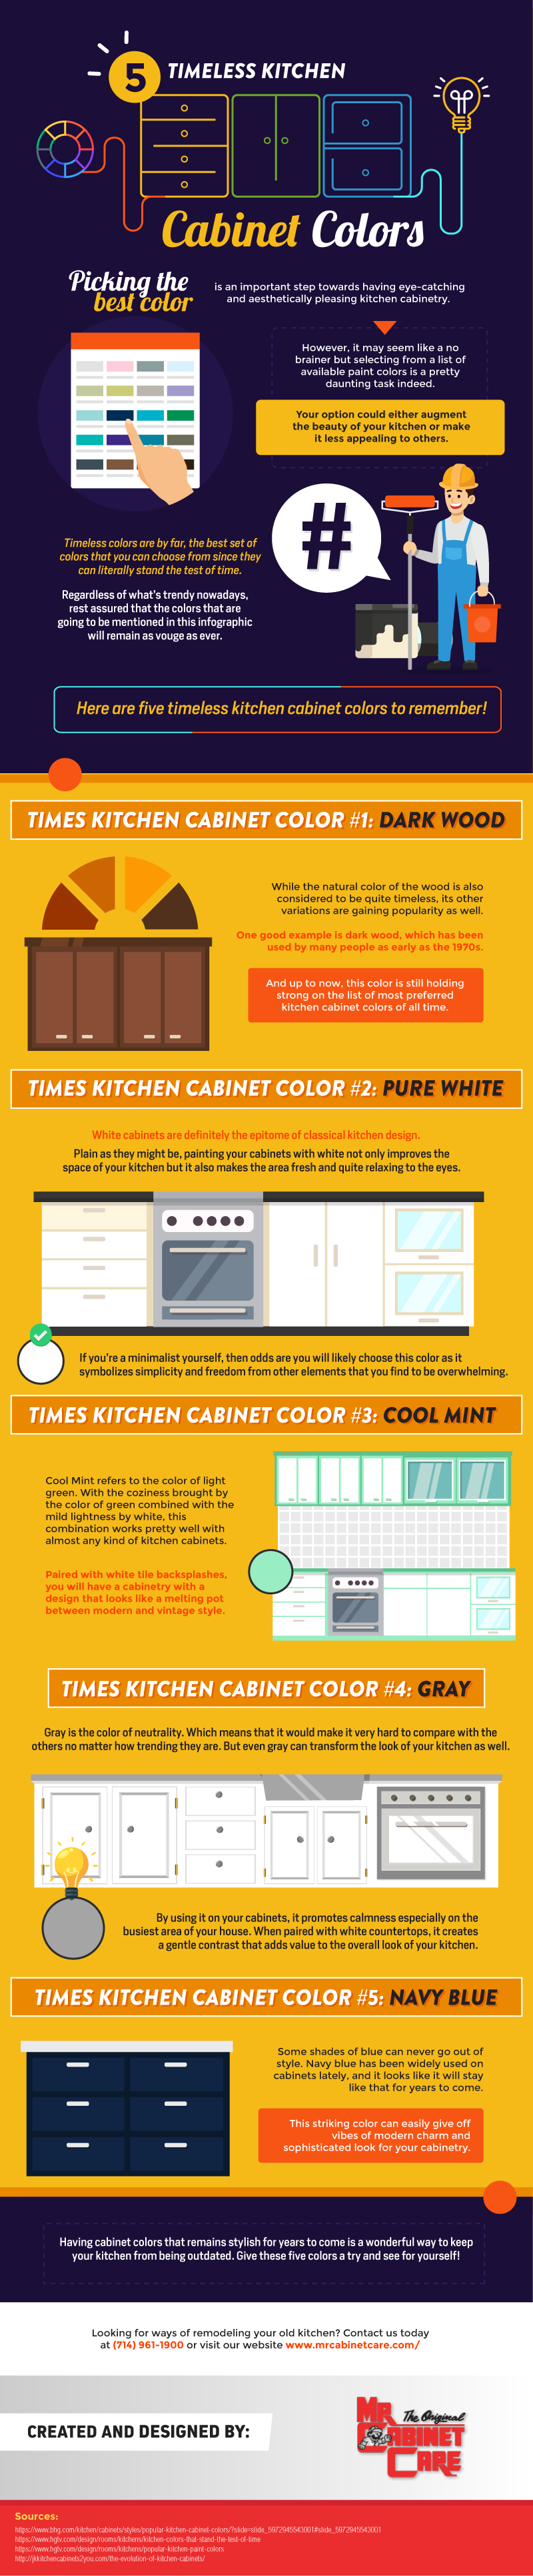 Top 5 Timeless Kitchen Cabinet Colors Infographic